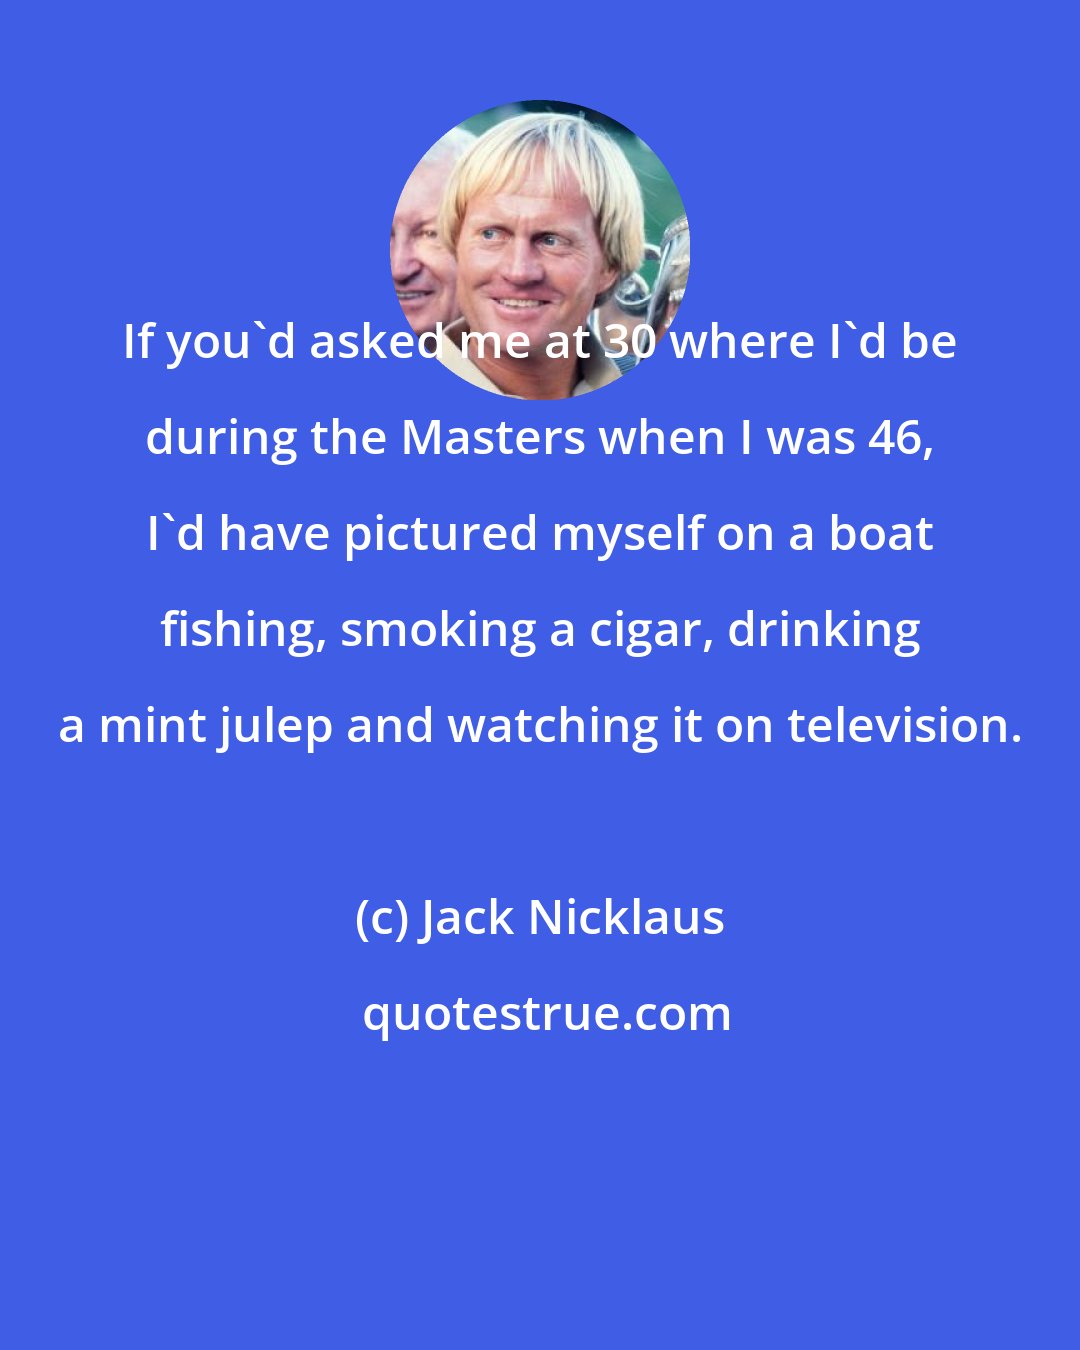 Jack Nicklaus: If you'd asked me at 30 where I'd be during the Masters when I was 46, I'd have pictured myself on a boat fishing, smoking a cigar, drinking a mint julep and watching it on television.